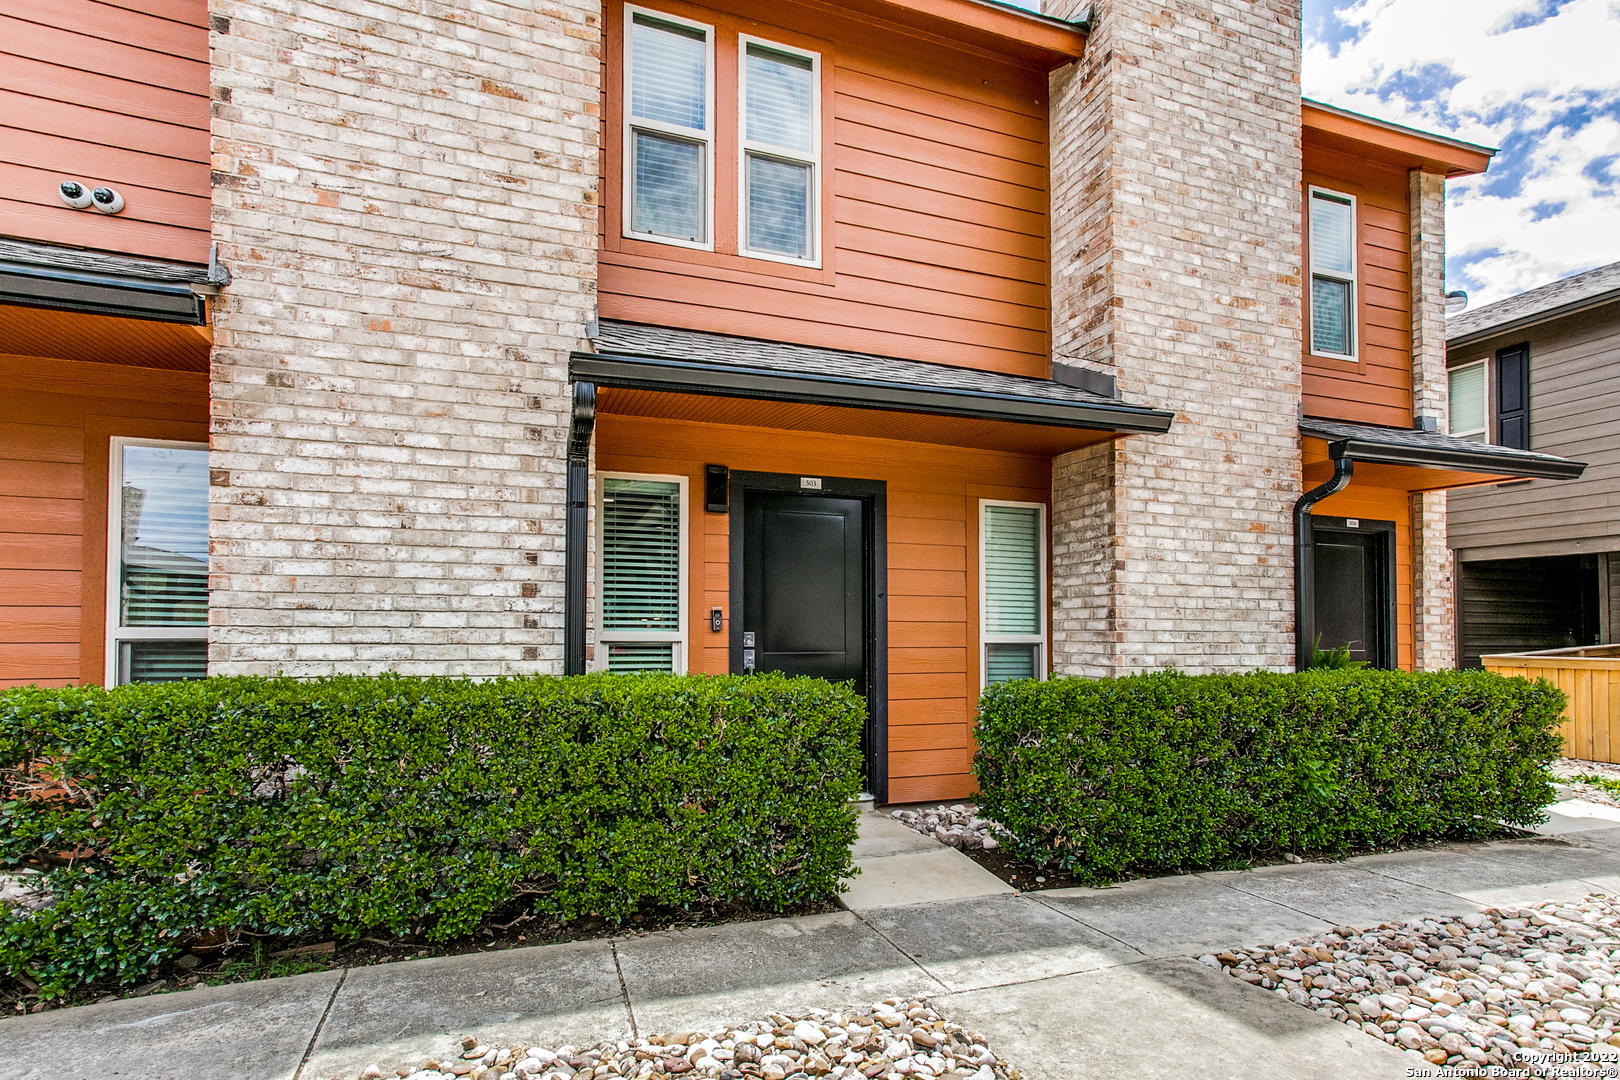 Newly and meticulously remodeled condominium in Calder Park, located in North Central San Antonio just off Jones Maltsberger.  This spacious 2 bed, 2 1/2 bath, +/- 1250 square foot town home is part of a 40-unit, non-smoking and gated-enclave community with easy access to 281, 1604, 410 and the airport.  Huge live oaks, professional landscaping throughout and a maintenance-free, privately fenced backyard complete the community's park-like setting.  Everything is brand new in this Clover floor plan option with designer touches everywhere.  It's San Antonio condo living at its finest!  Come see it today.